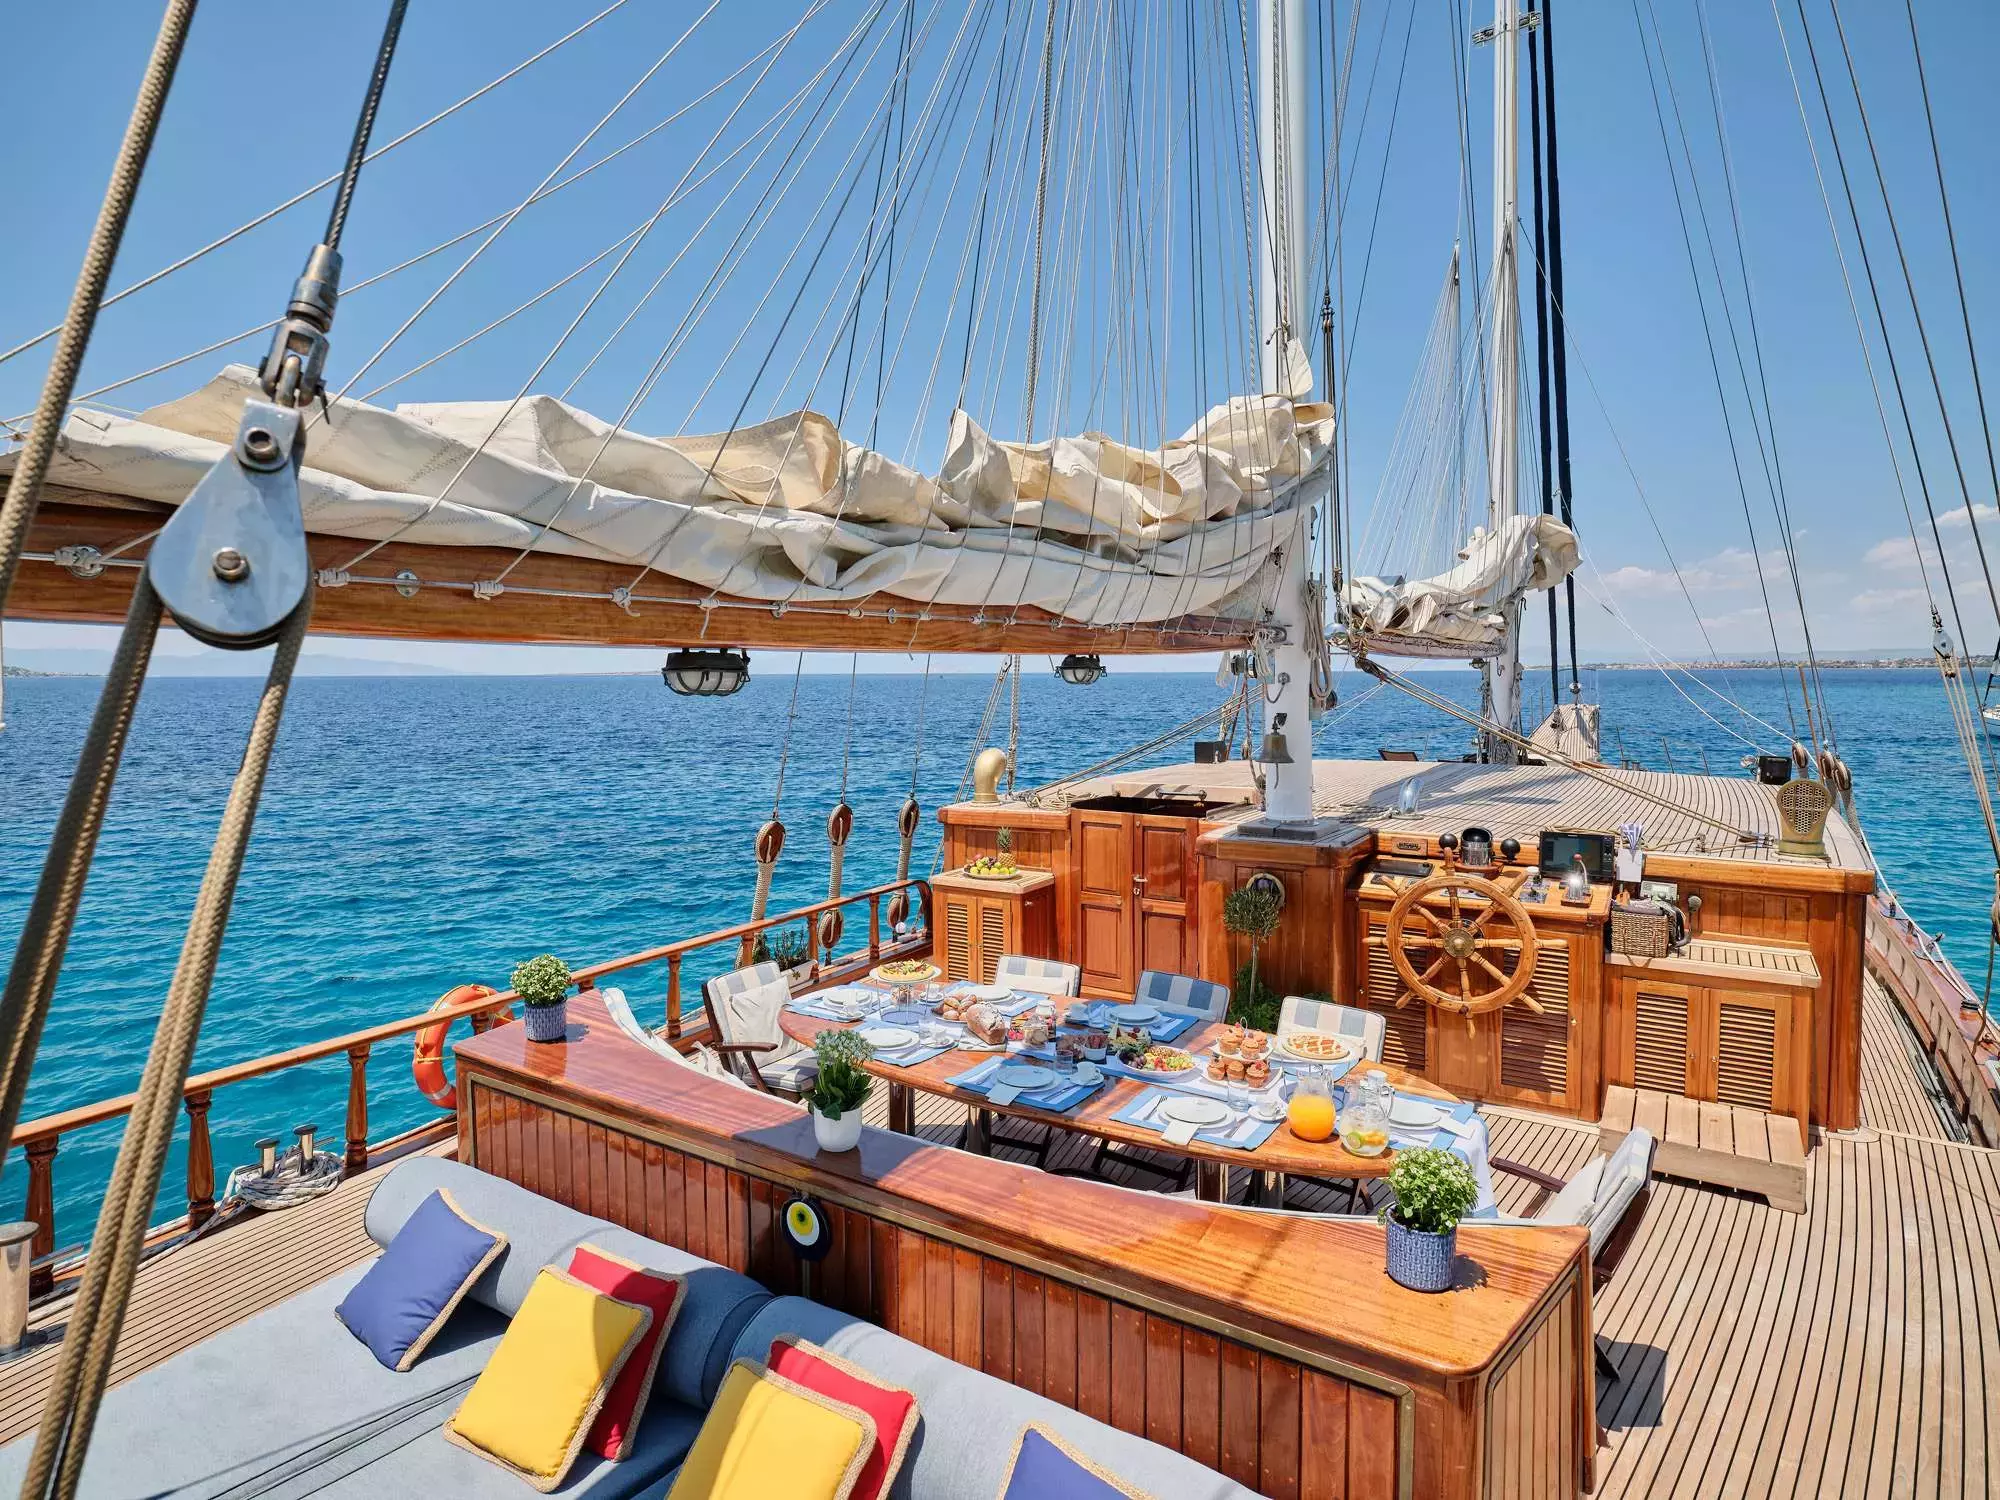 Myra by Ege Yat - Special Offer for a private Motor Sailer Charter in Athens with a crew